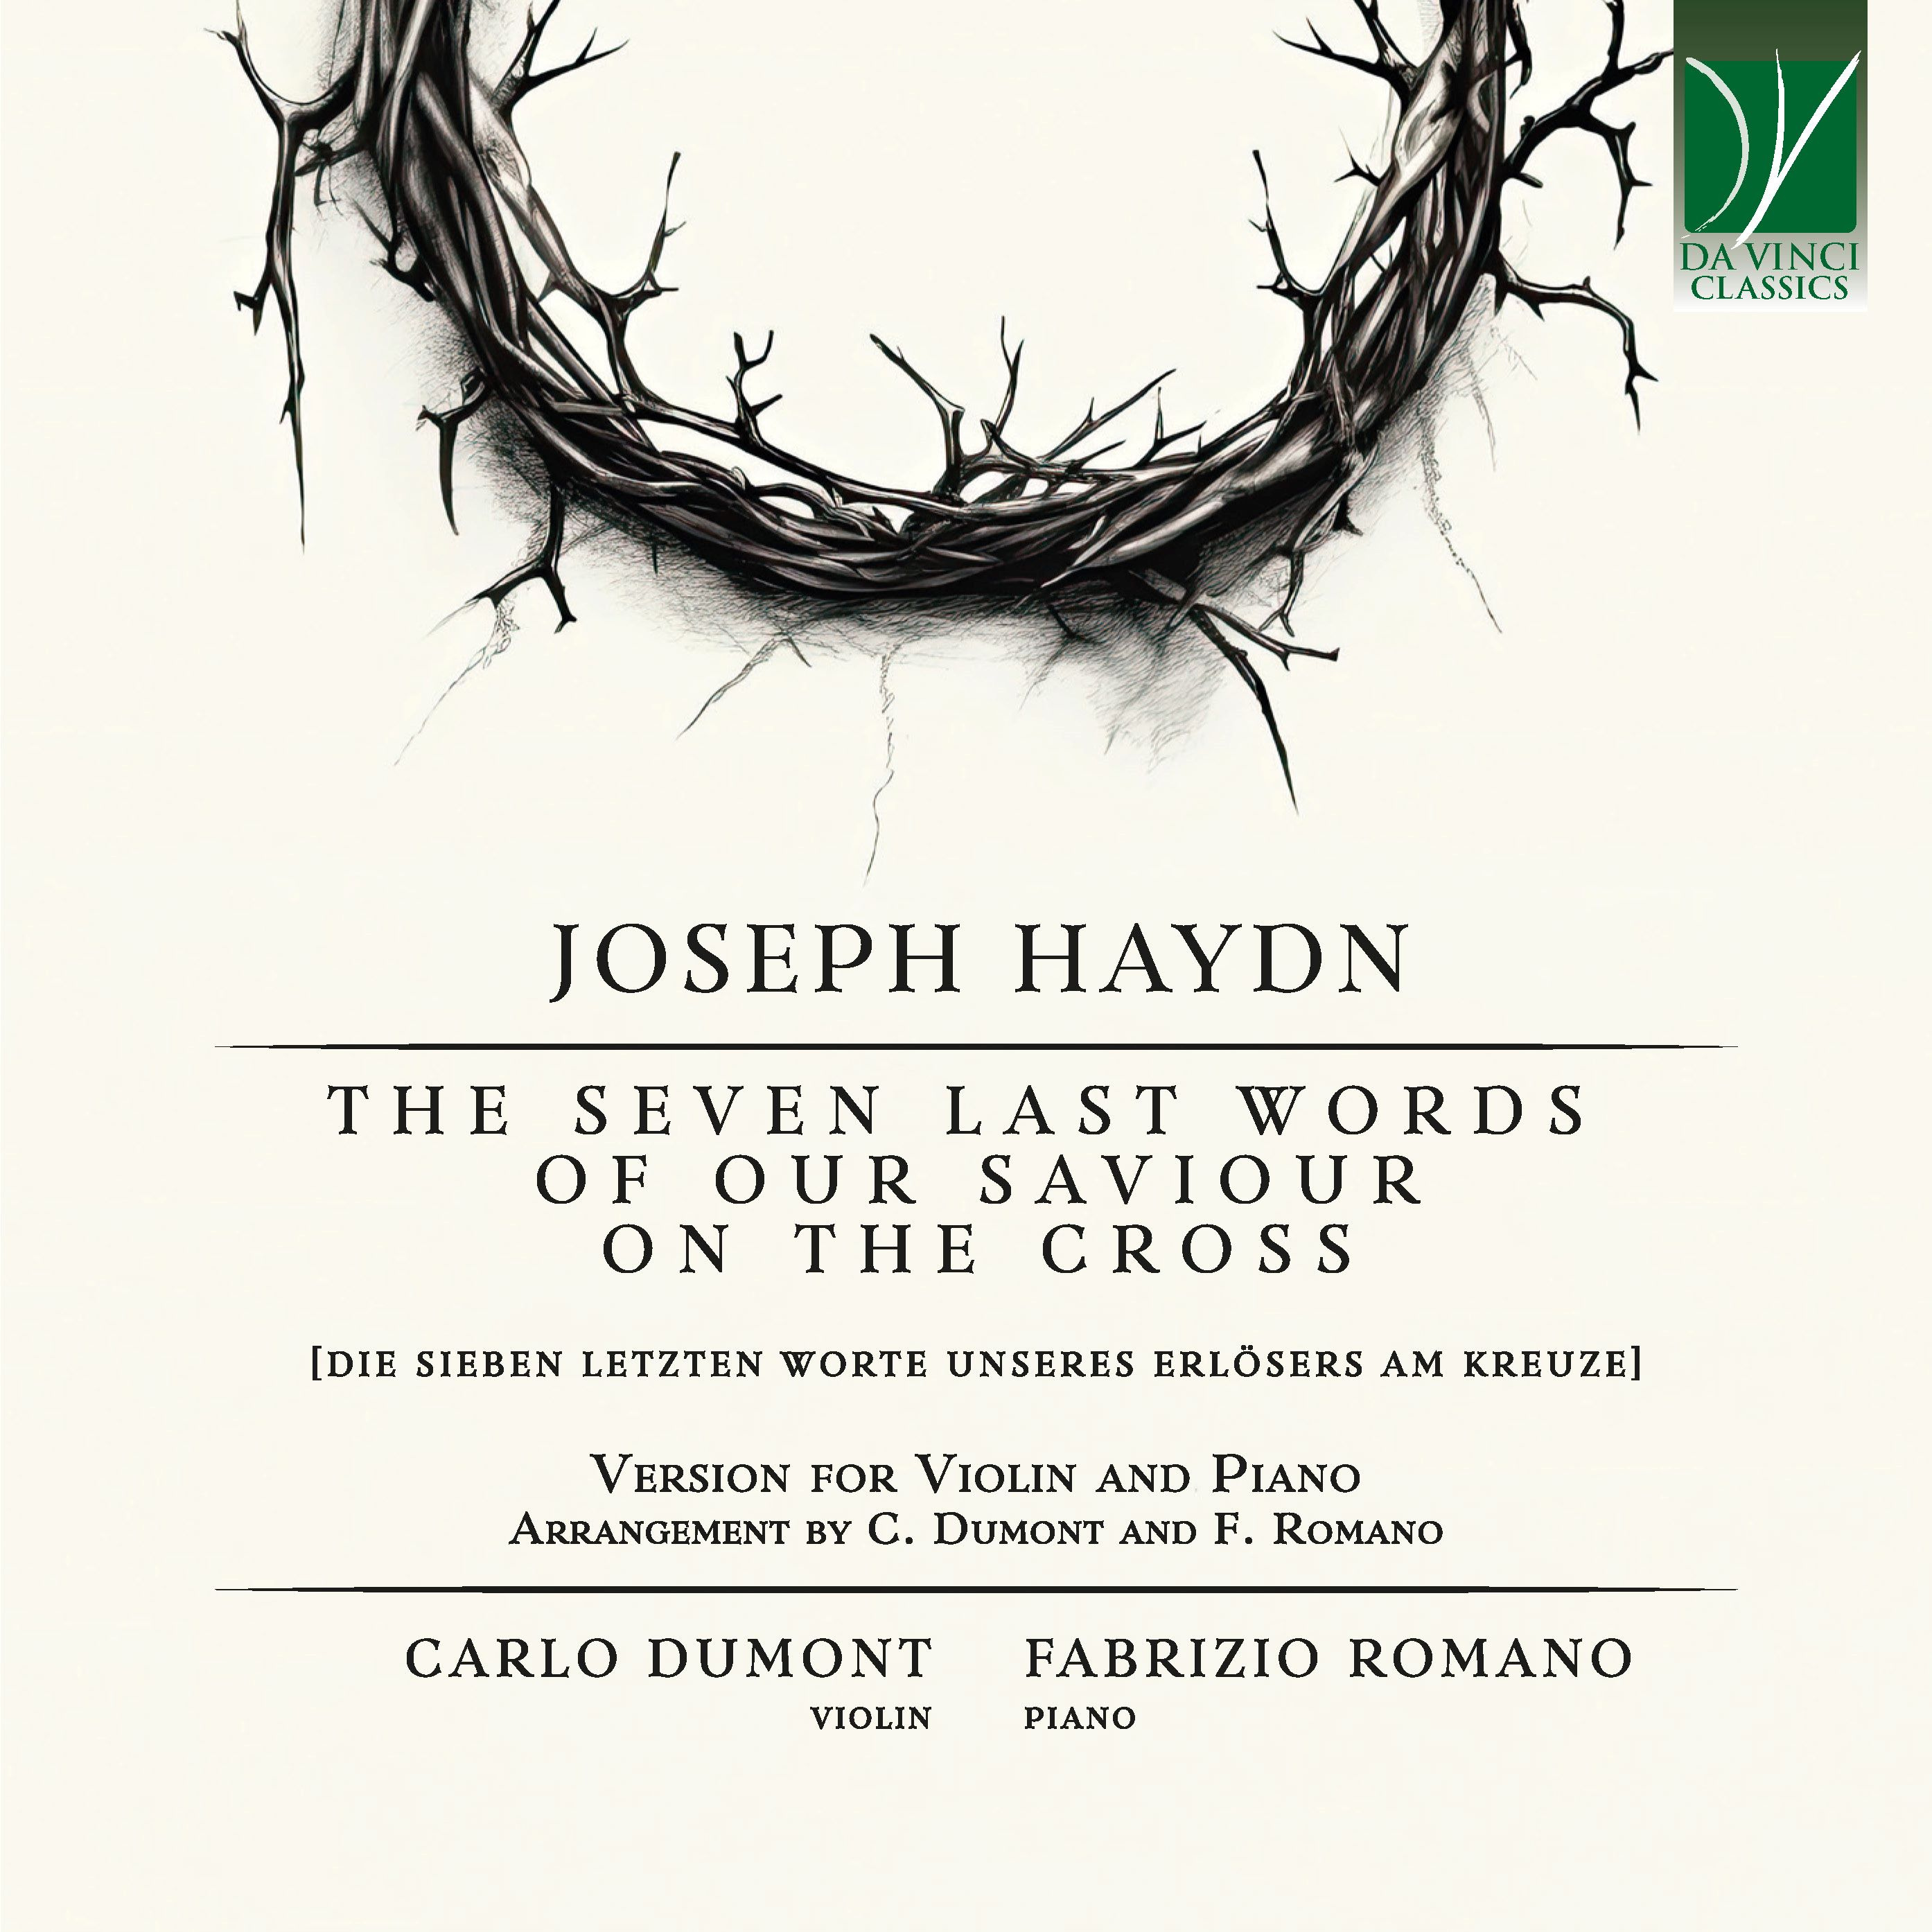 JOSEPH HAYDN: THE SEVEN LAST WORDS OF OUR SAVIOUR ON THE CROSS, VERSION FOR VIO